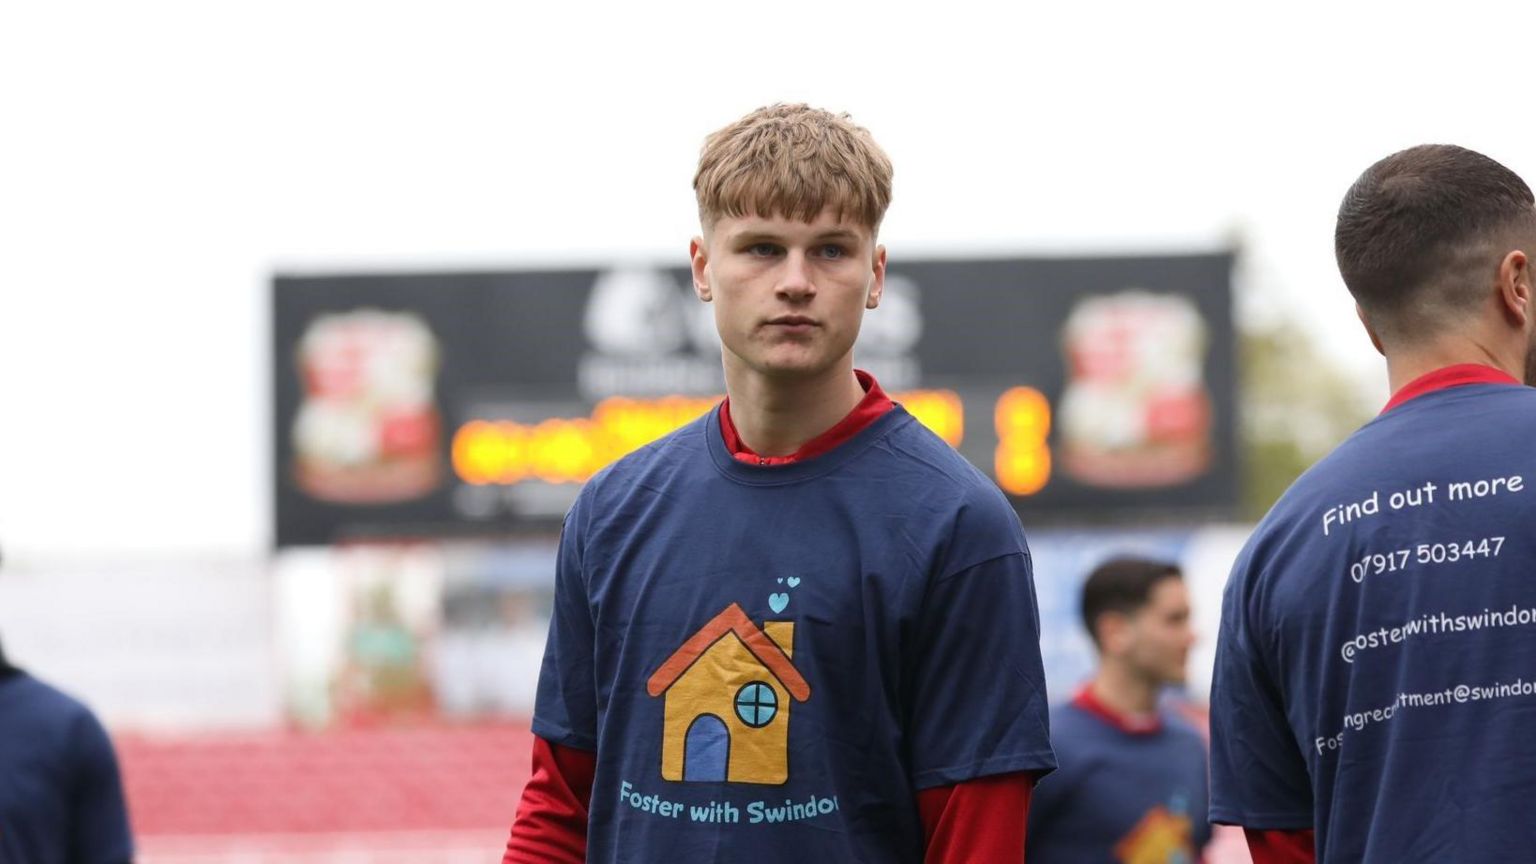 Swindon Town Defender Harley Hunt wears a t-short to promote foster caring at the County Ground